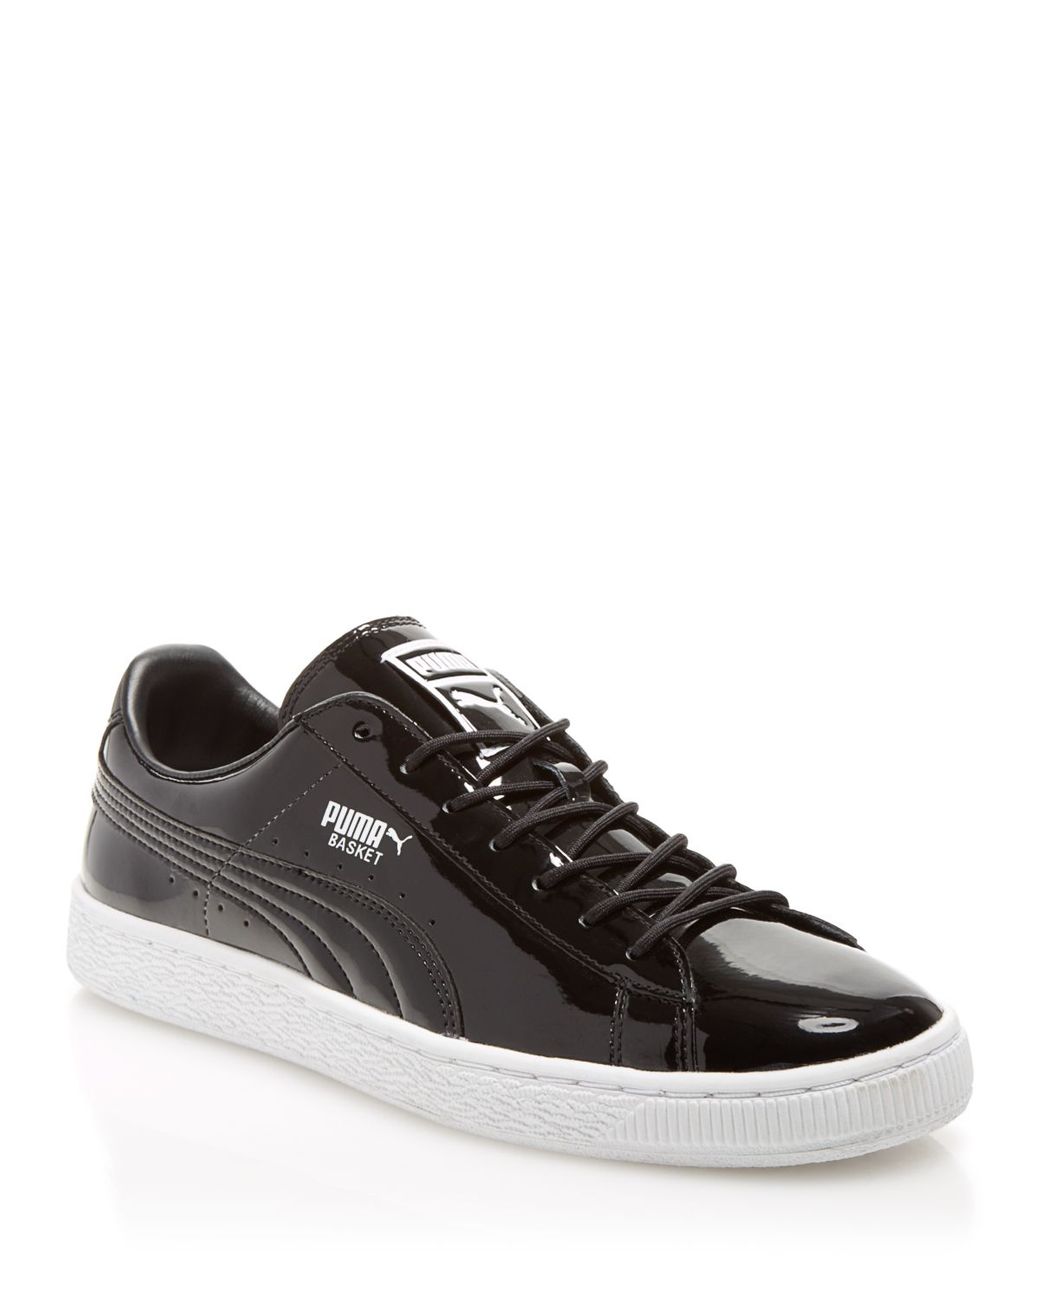 PUMA Basket Patent Leather Sneakers for Men |